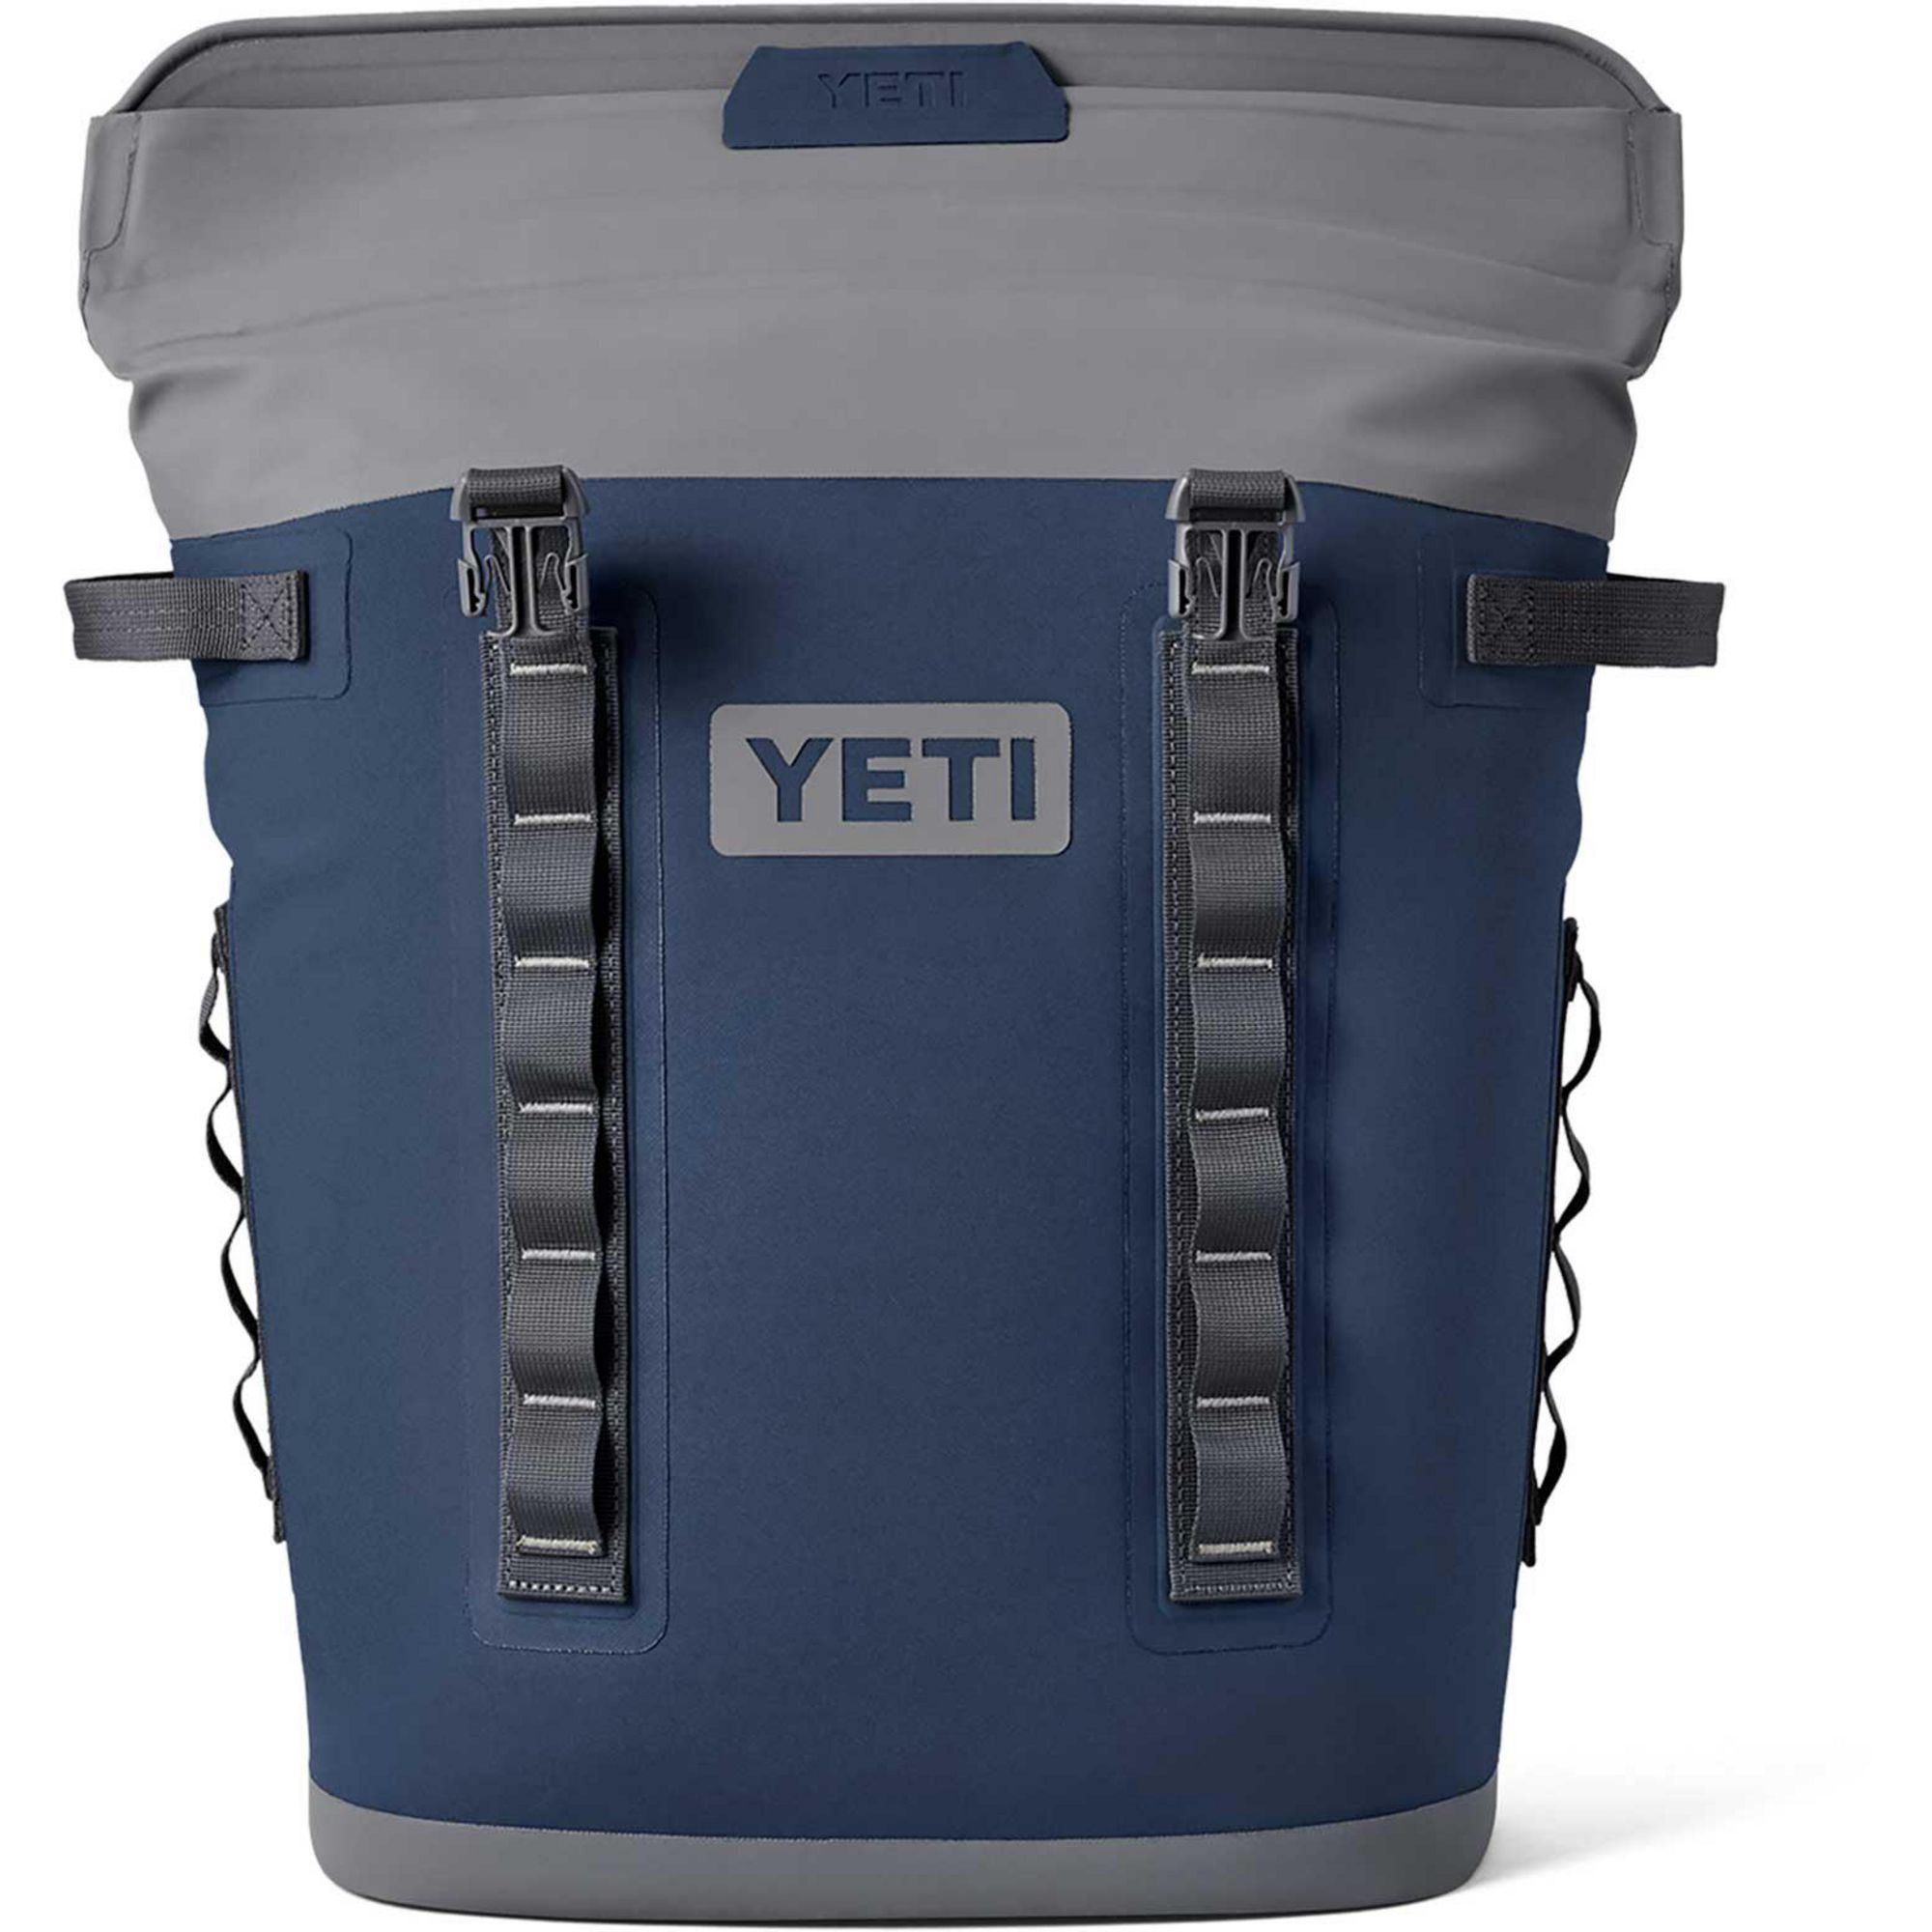 Is It Worth It? Yeti Hopper M20 Soft Backpack Cooler Review! 